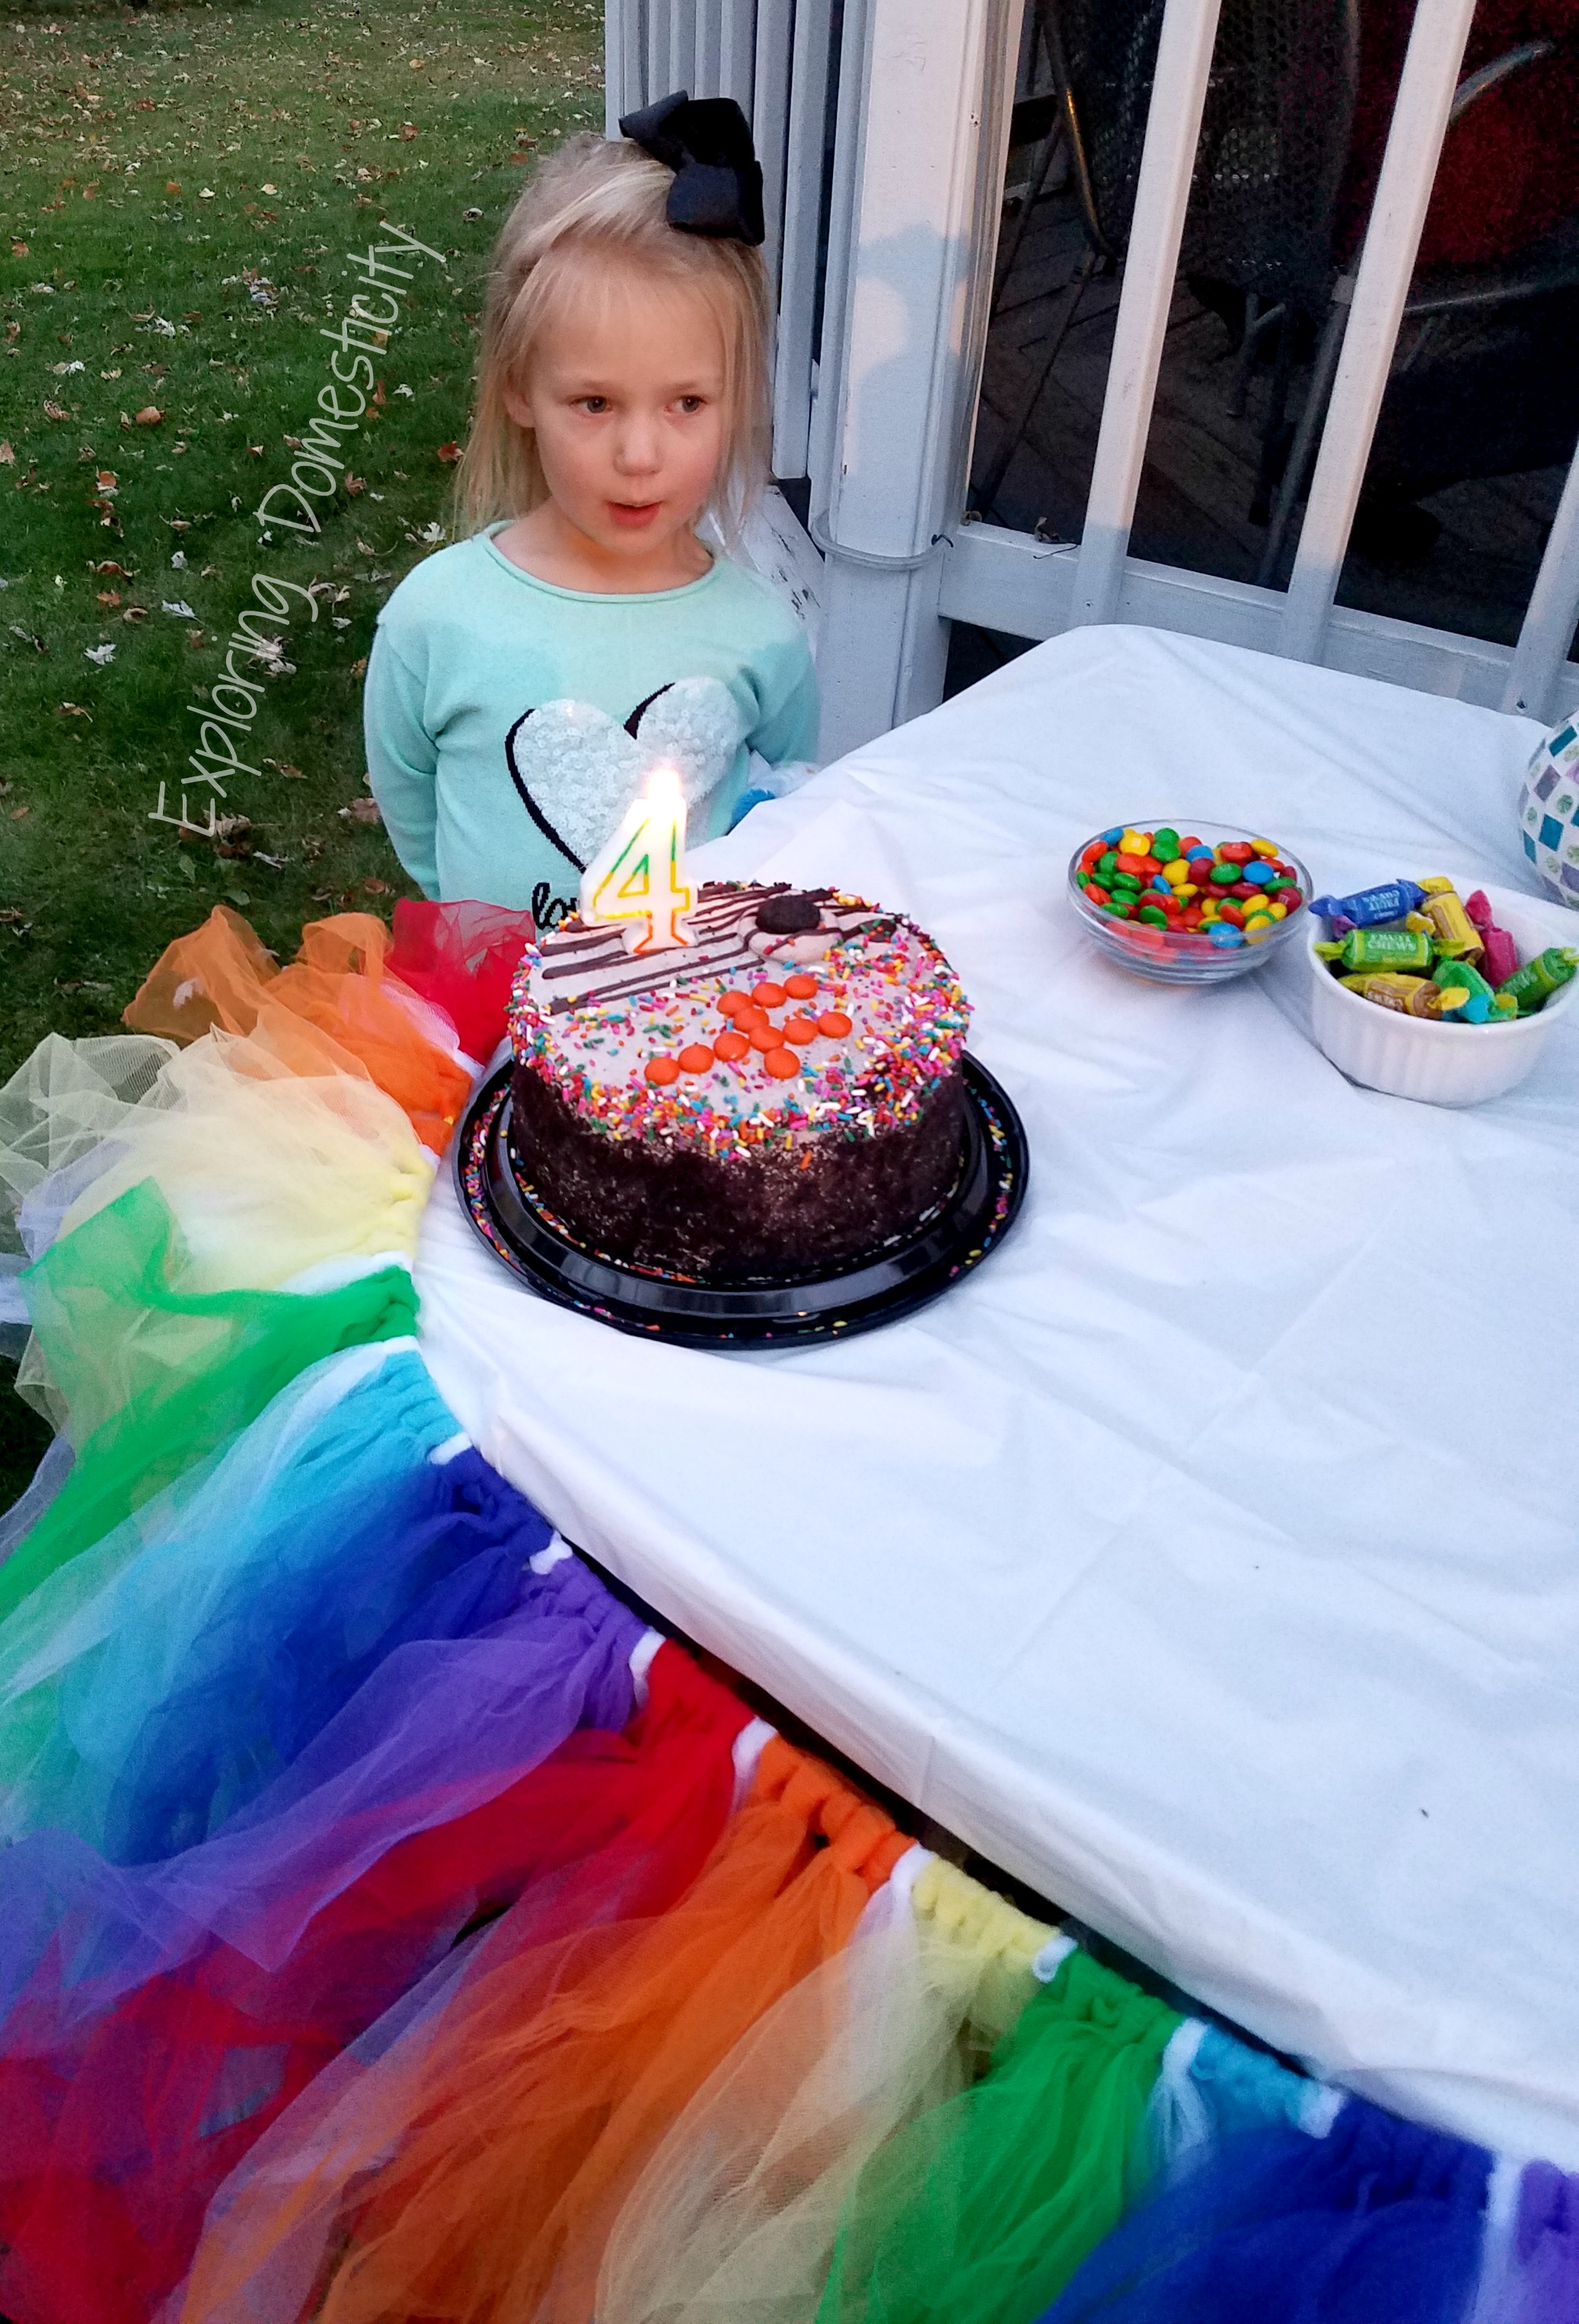 Rainbow Birthday Party: decorations, food, and special touches ⋆ Exploring  Domesticity